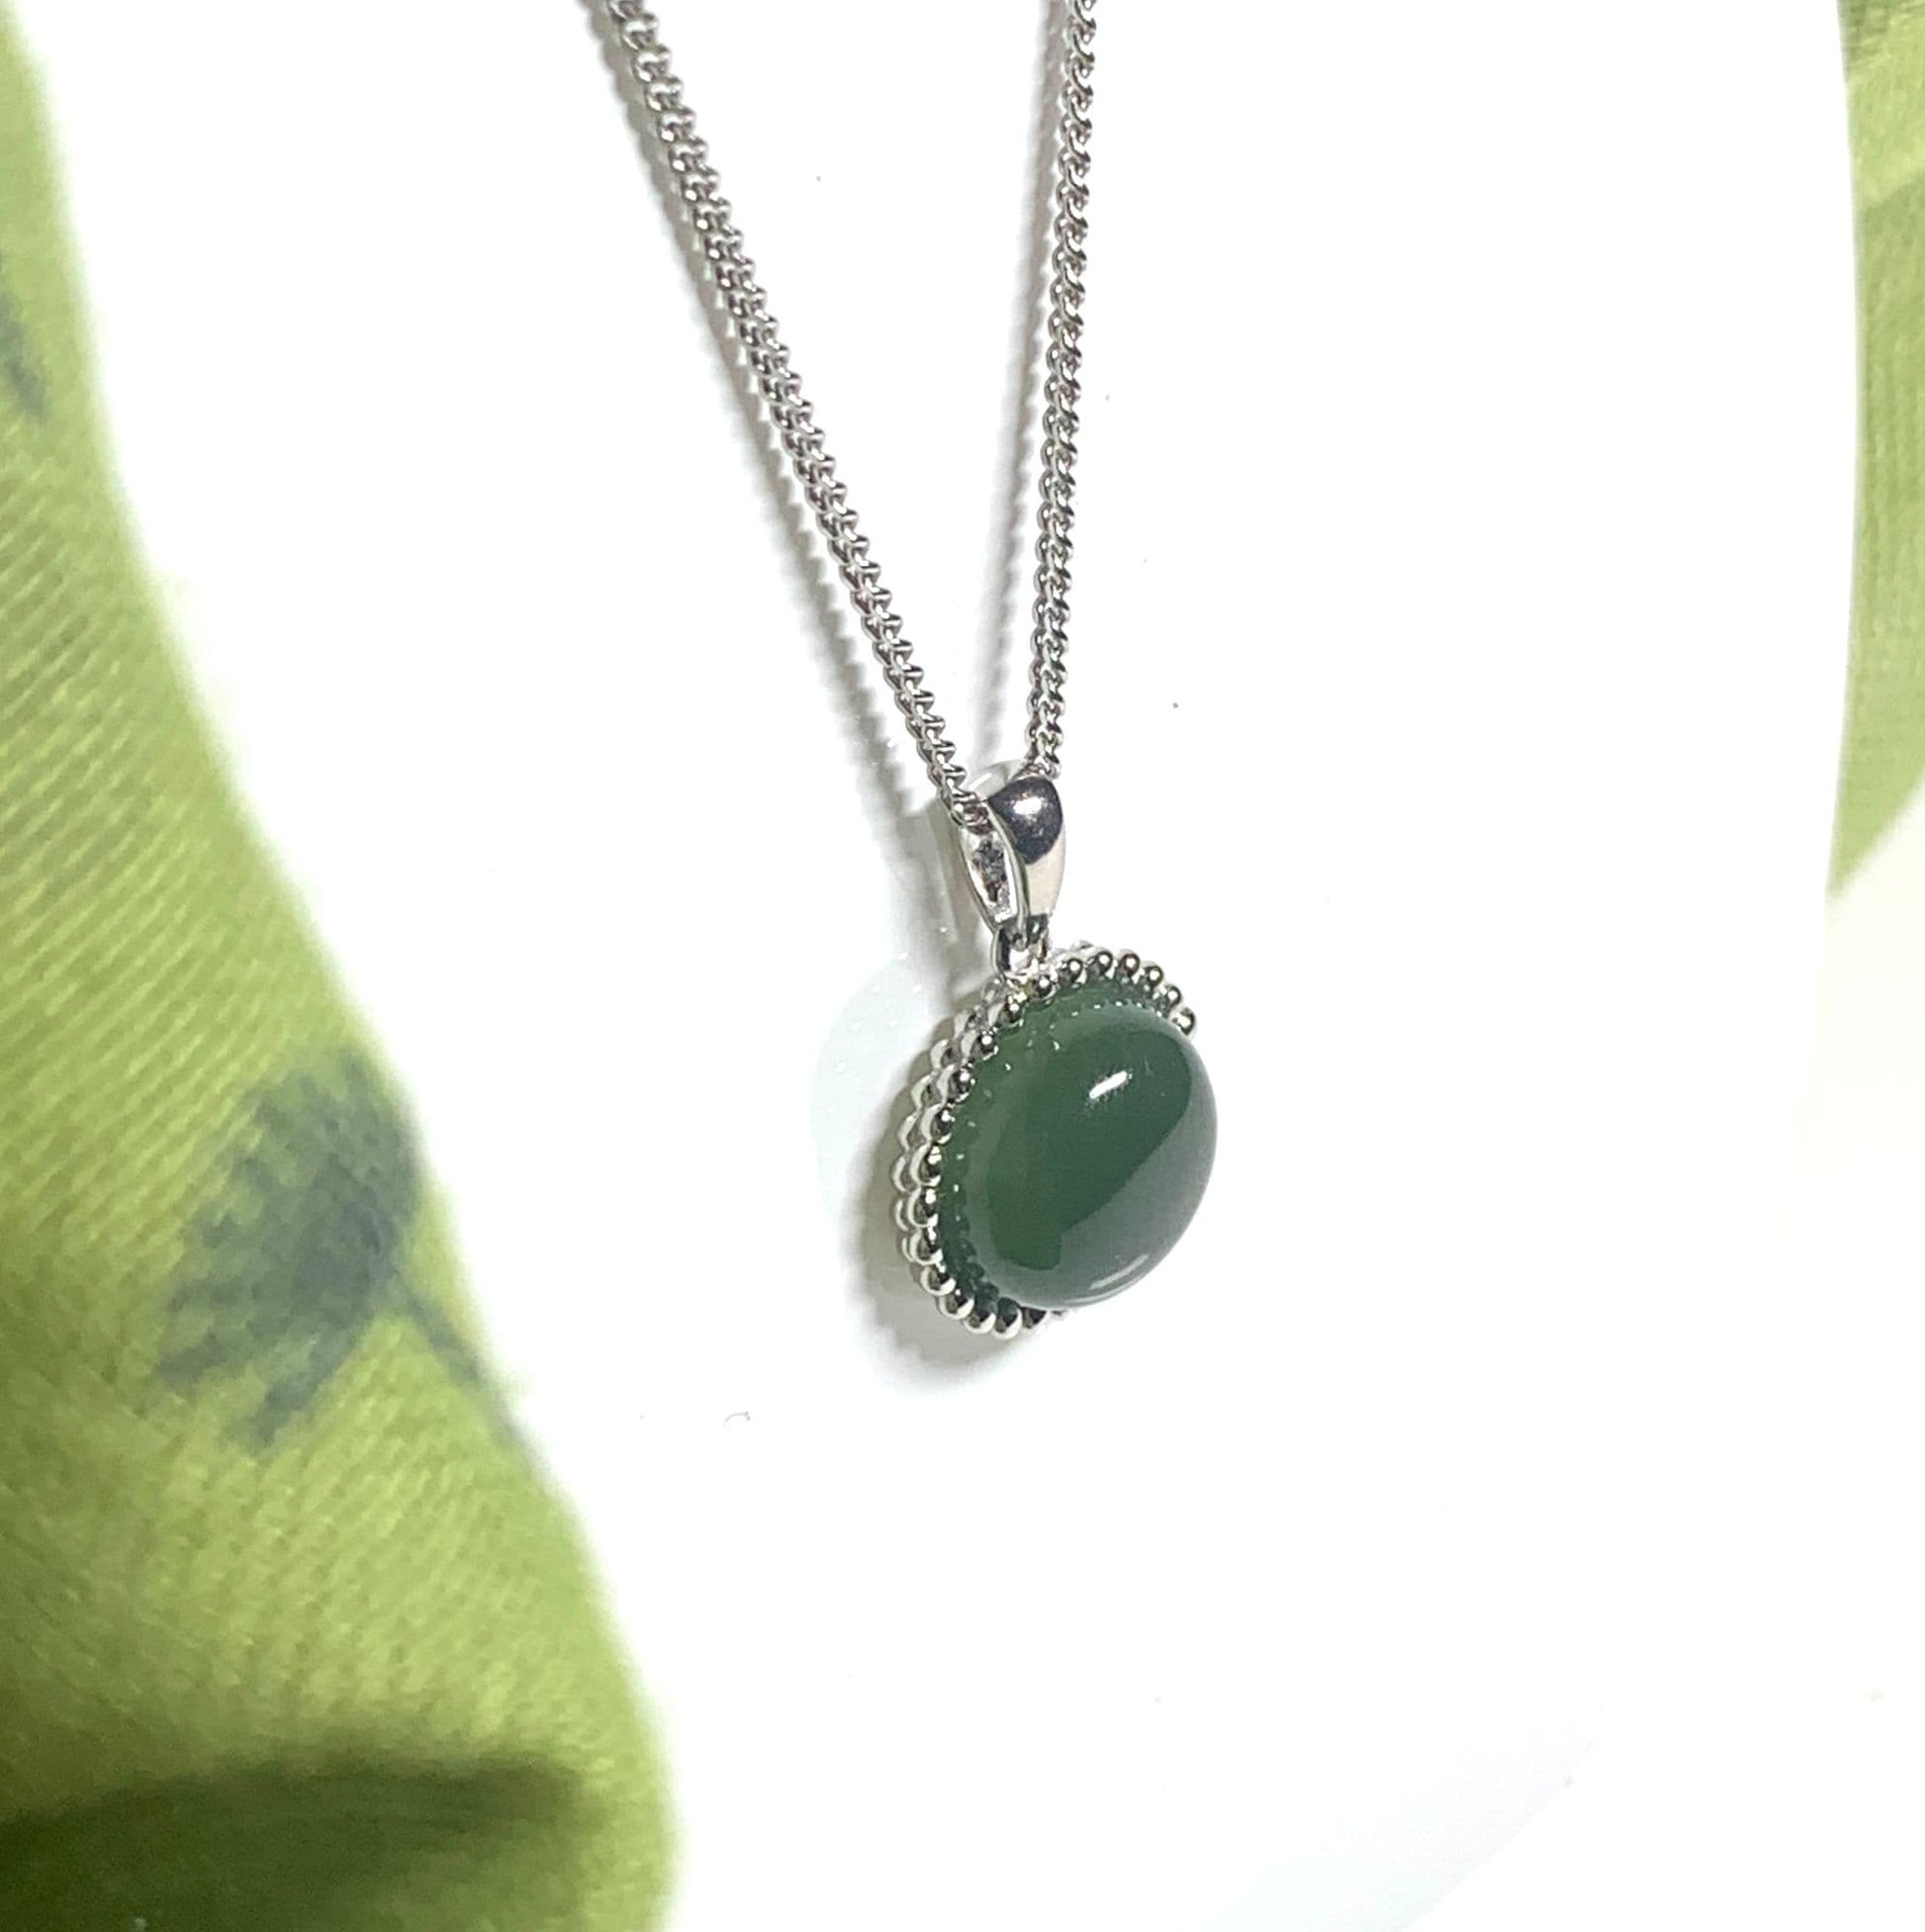 Round green jade patterned bobbled necklace sterling silver pendant